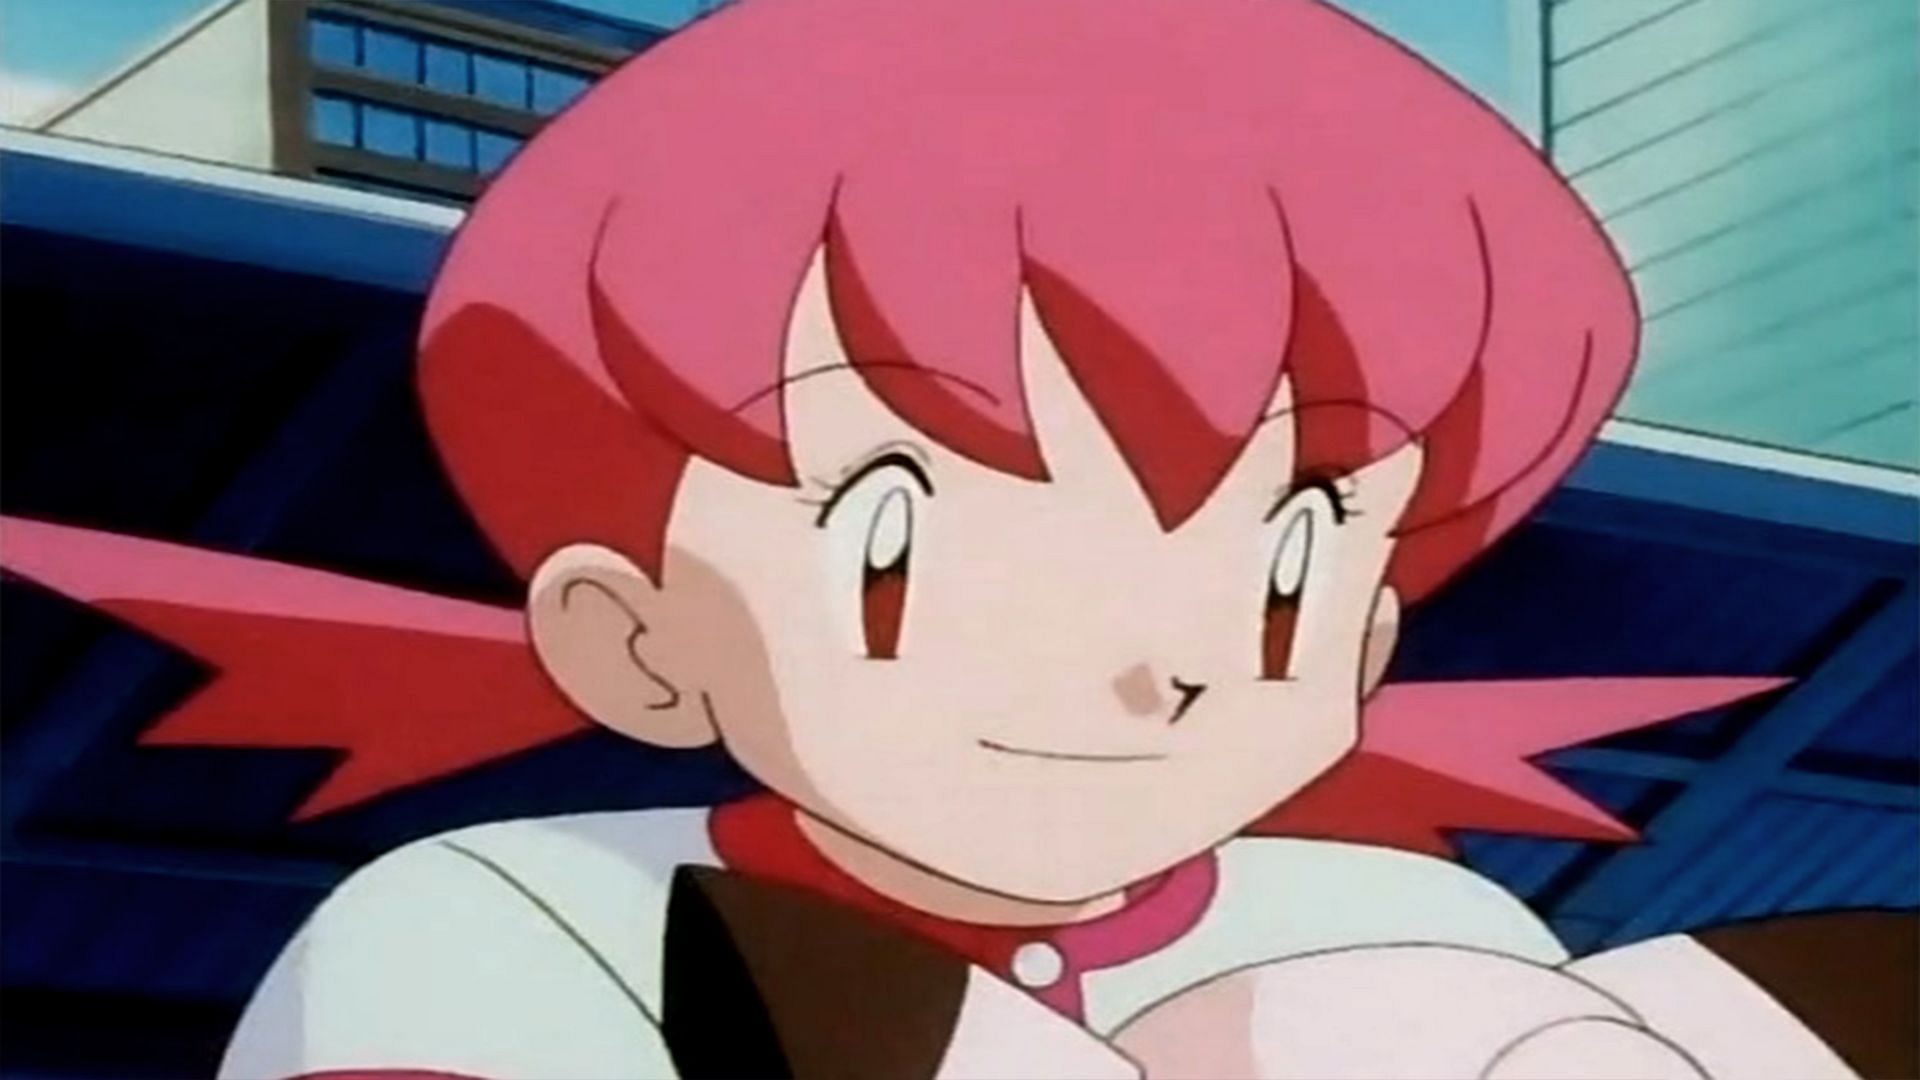 Whitney as she appears in the anime (Image via The Pokemon Company)